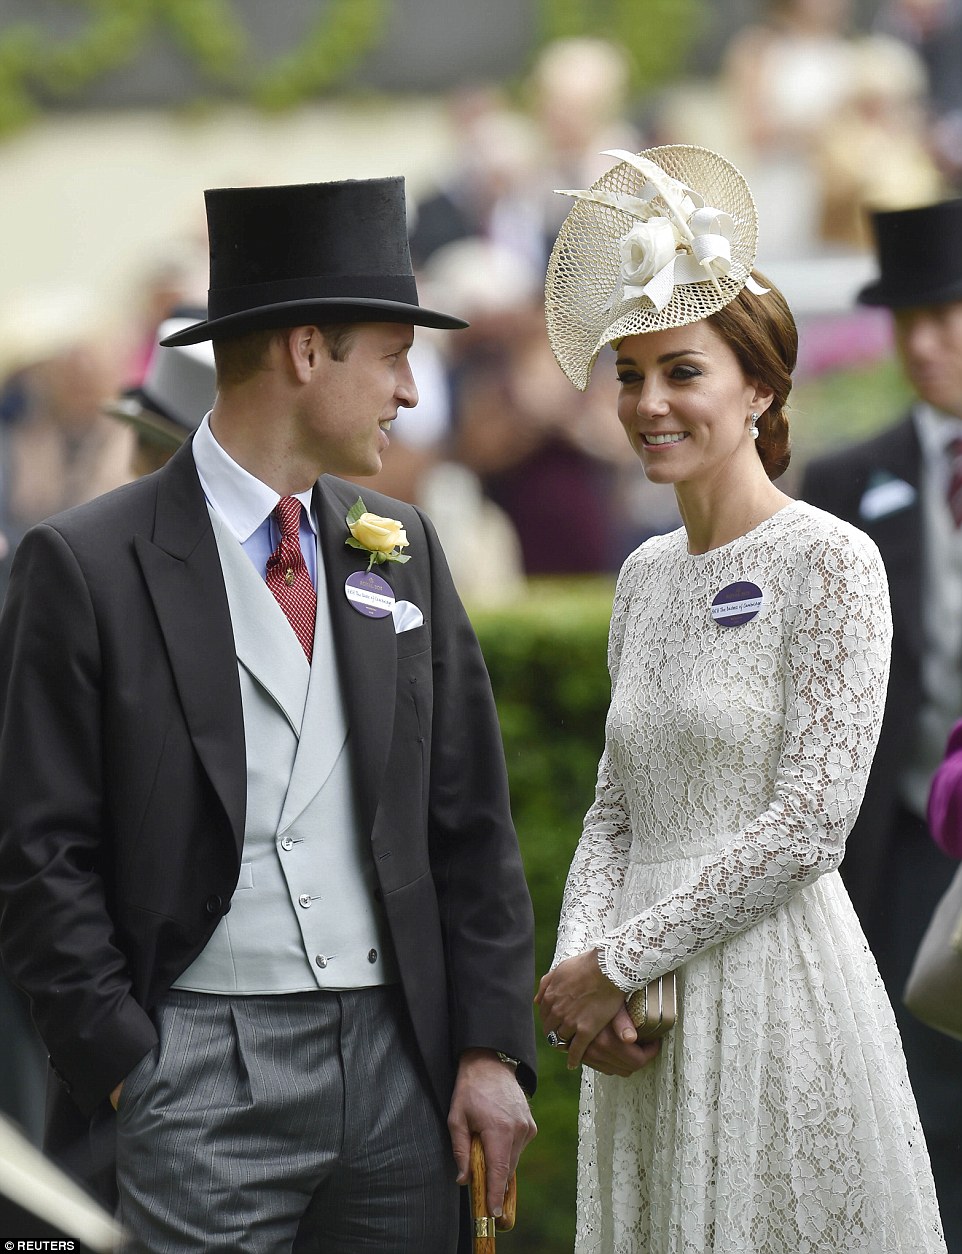 Clearly enjoying their first trip to the historic racecourse, the royal couple looked happy and relaxed as they chatted